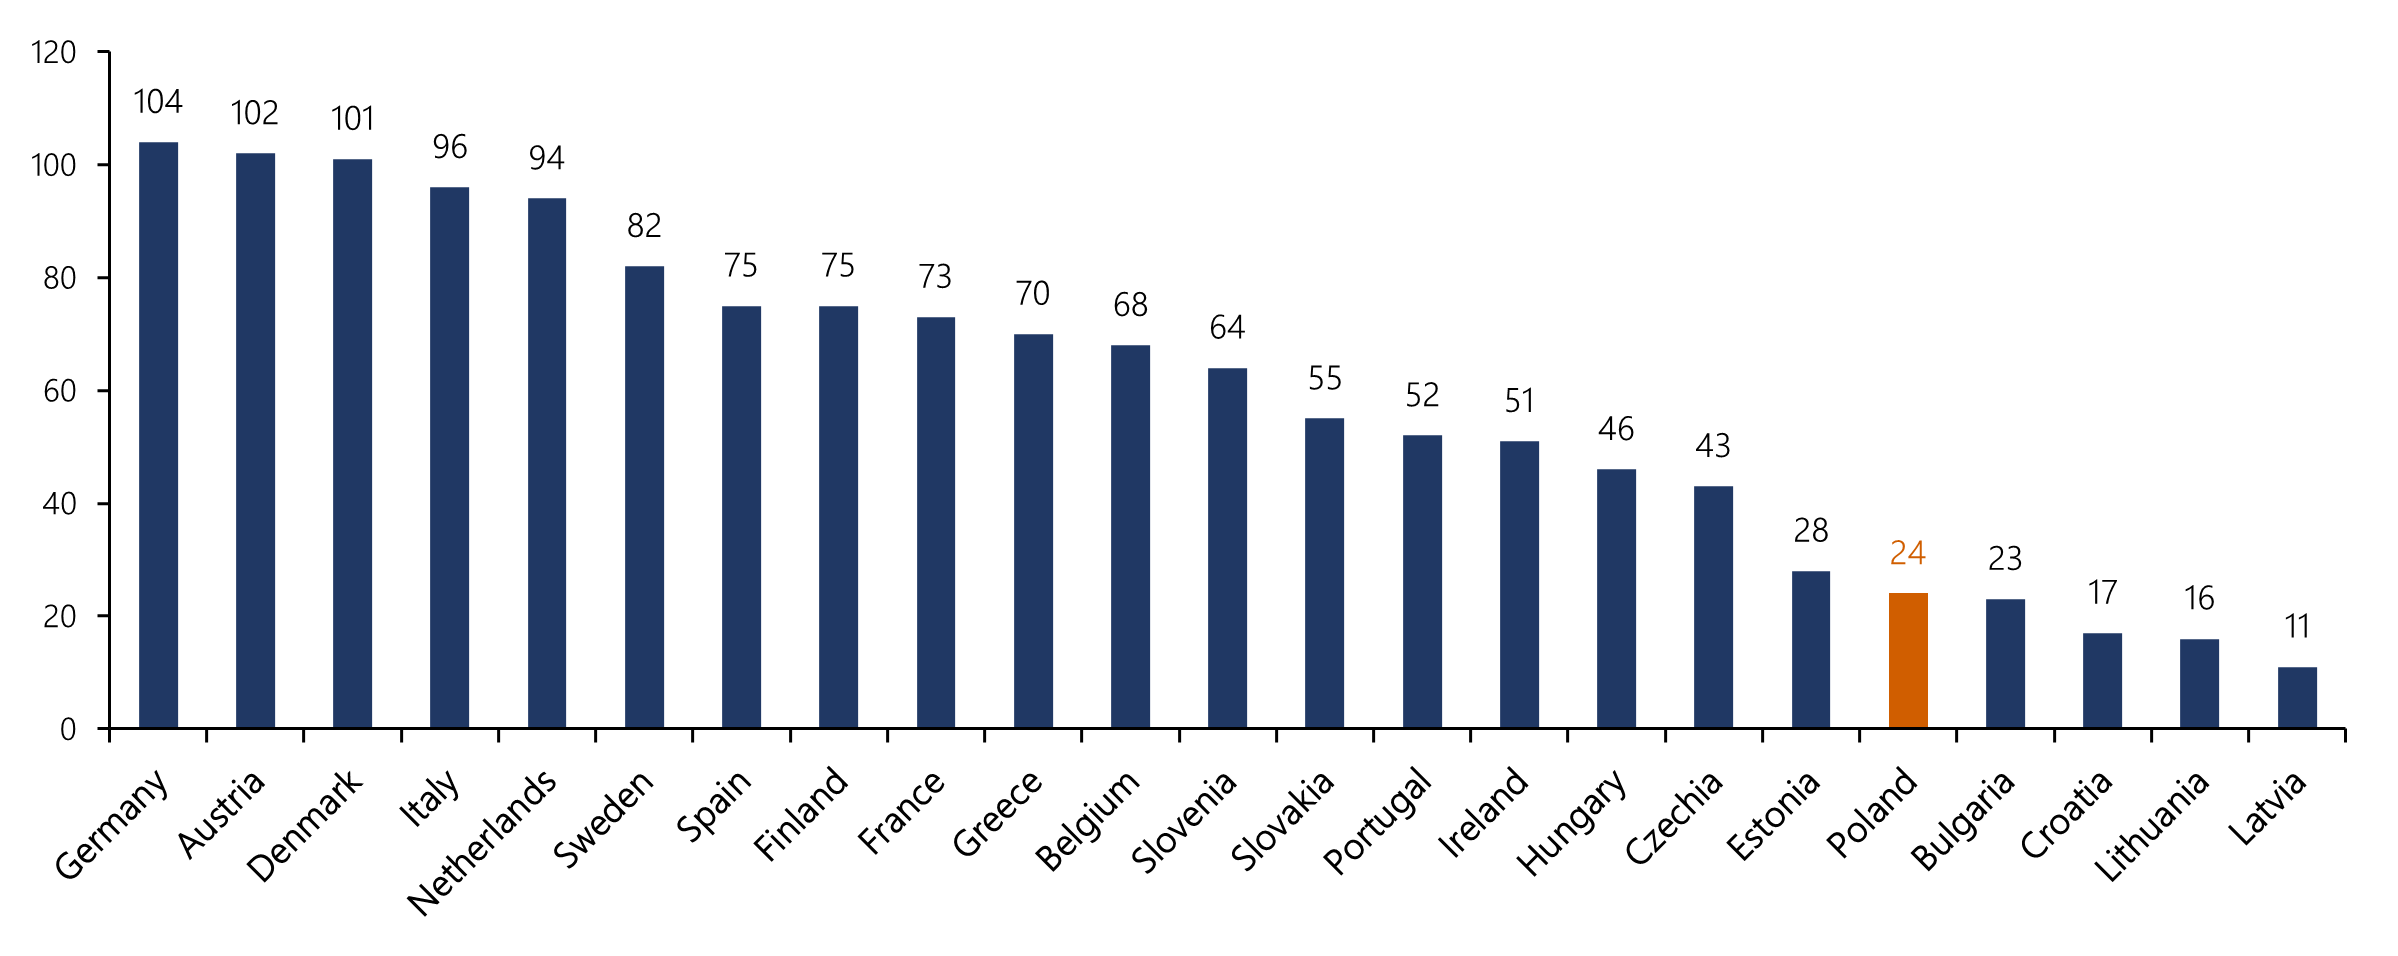 Access to medicines approved by EMA in 2015-17 as of 2018, by country.